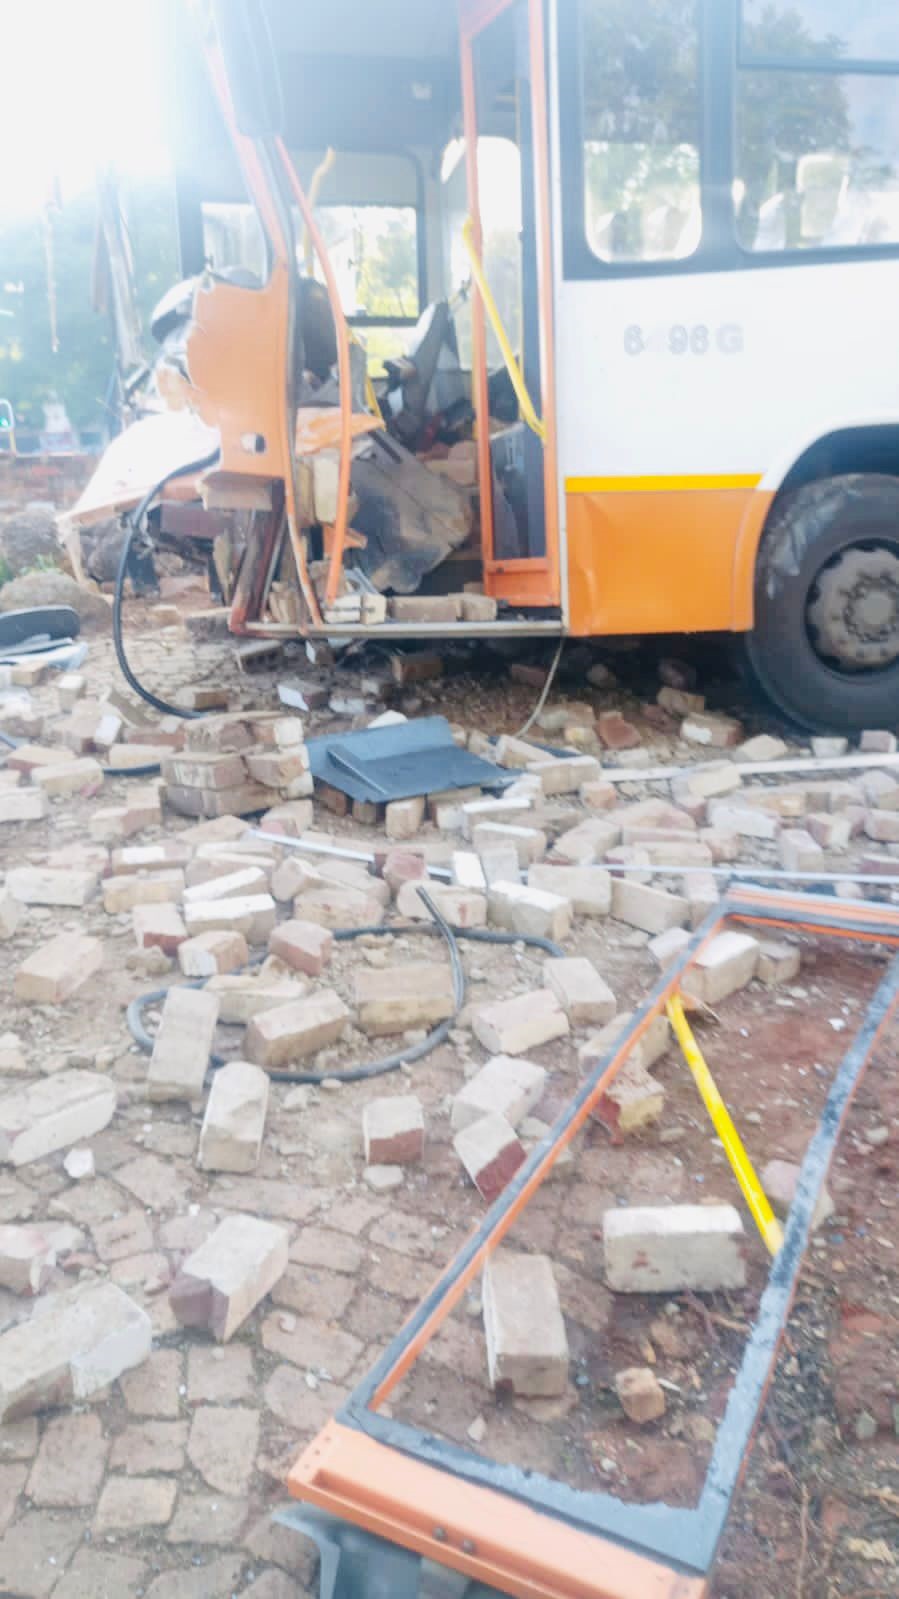 A Putco bus lost control and bumped into a wall on corner Oxford and Bomoas road in Joburg. Photo by Keletso Mkhwanazi